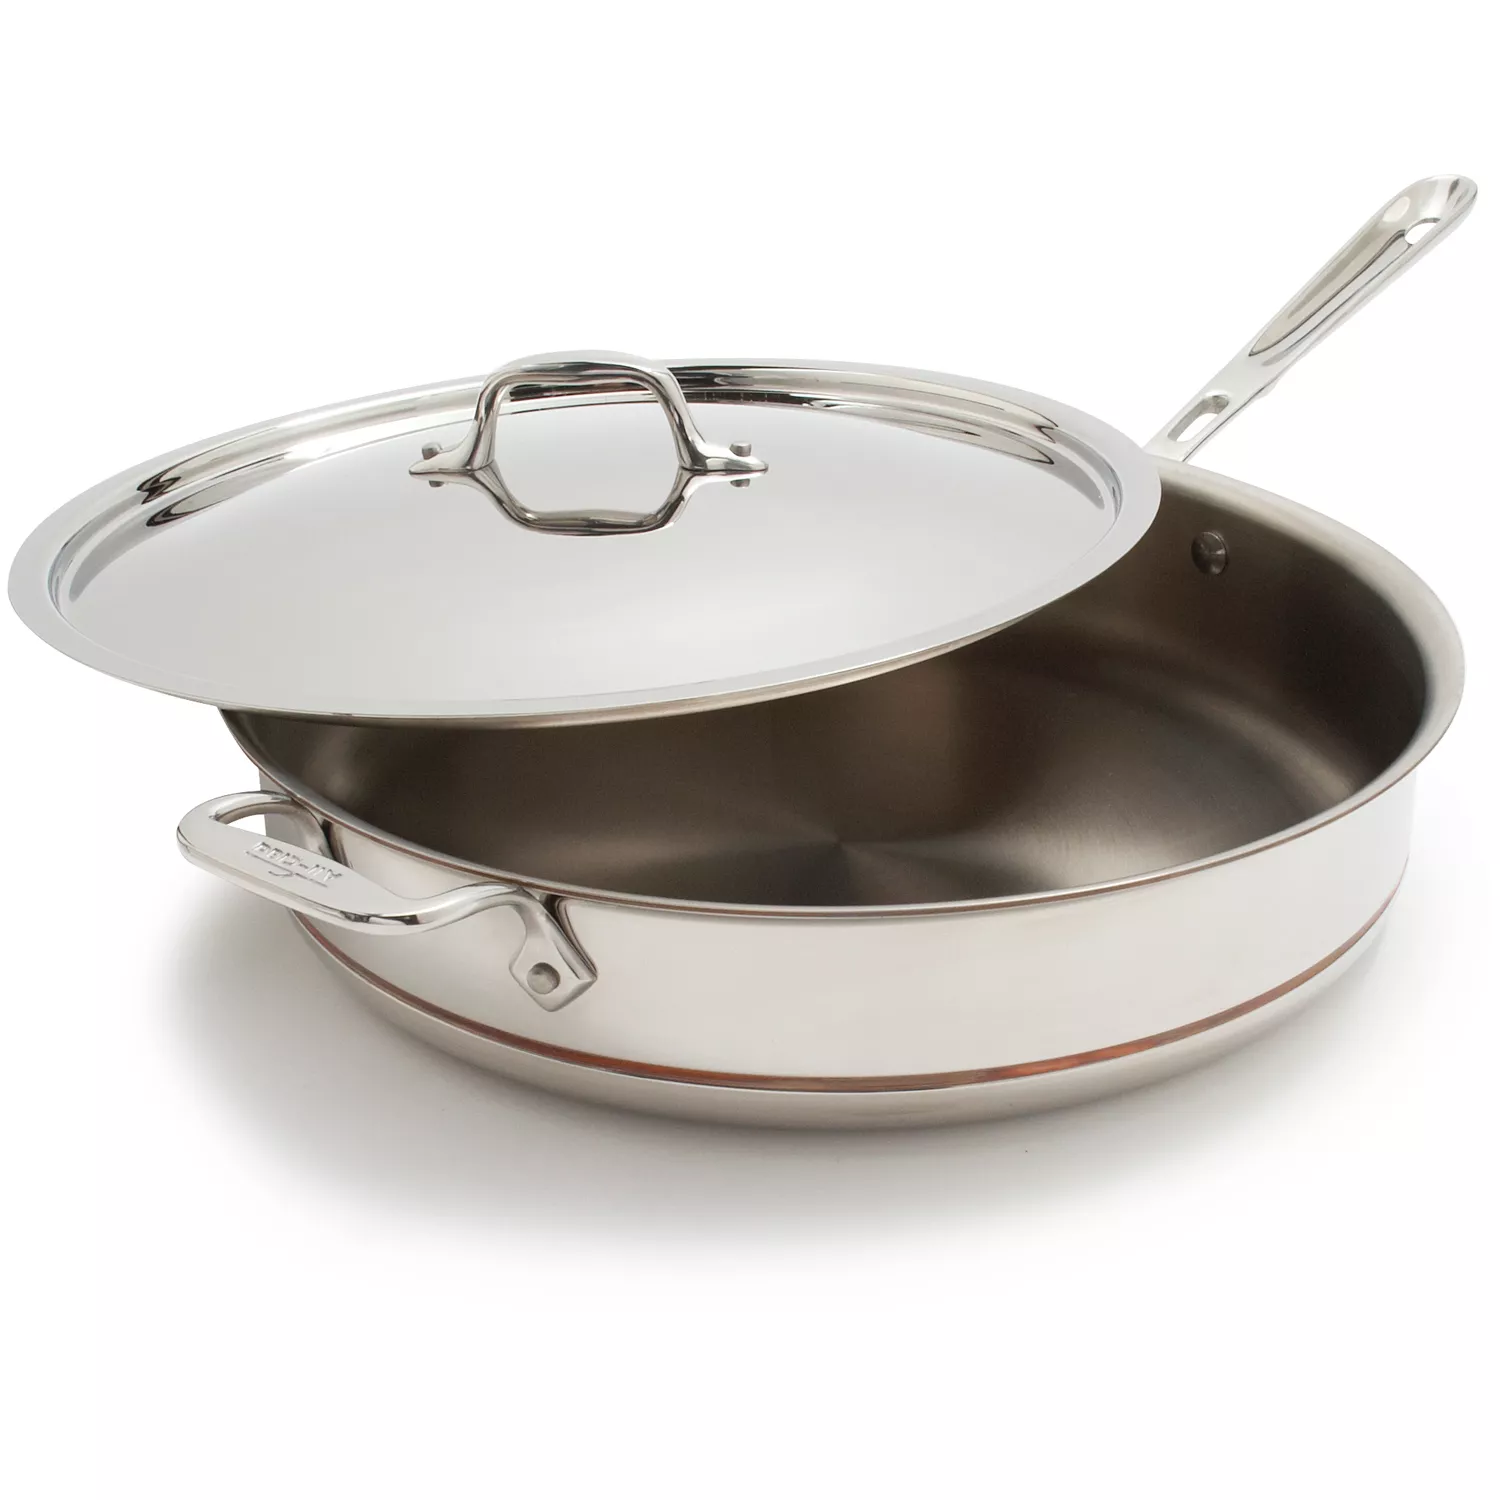 All-Clad Copper Core Saute Pan - 5-qt – Cutlery and More